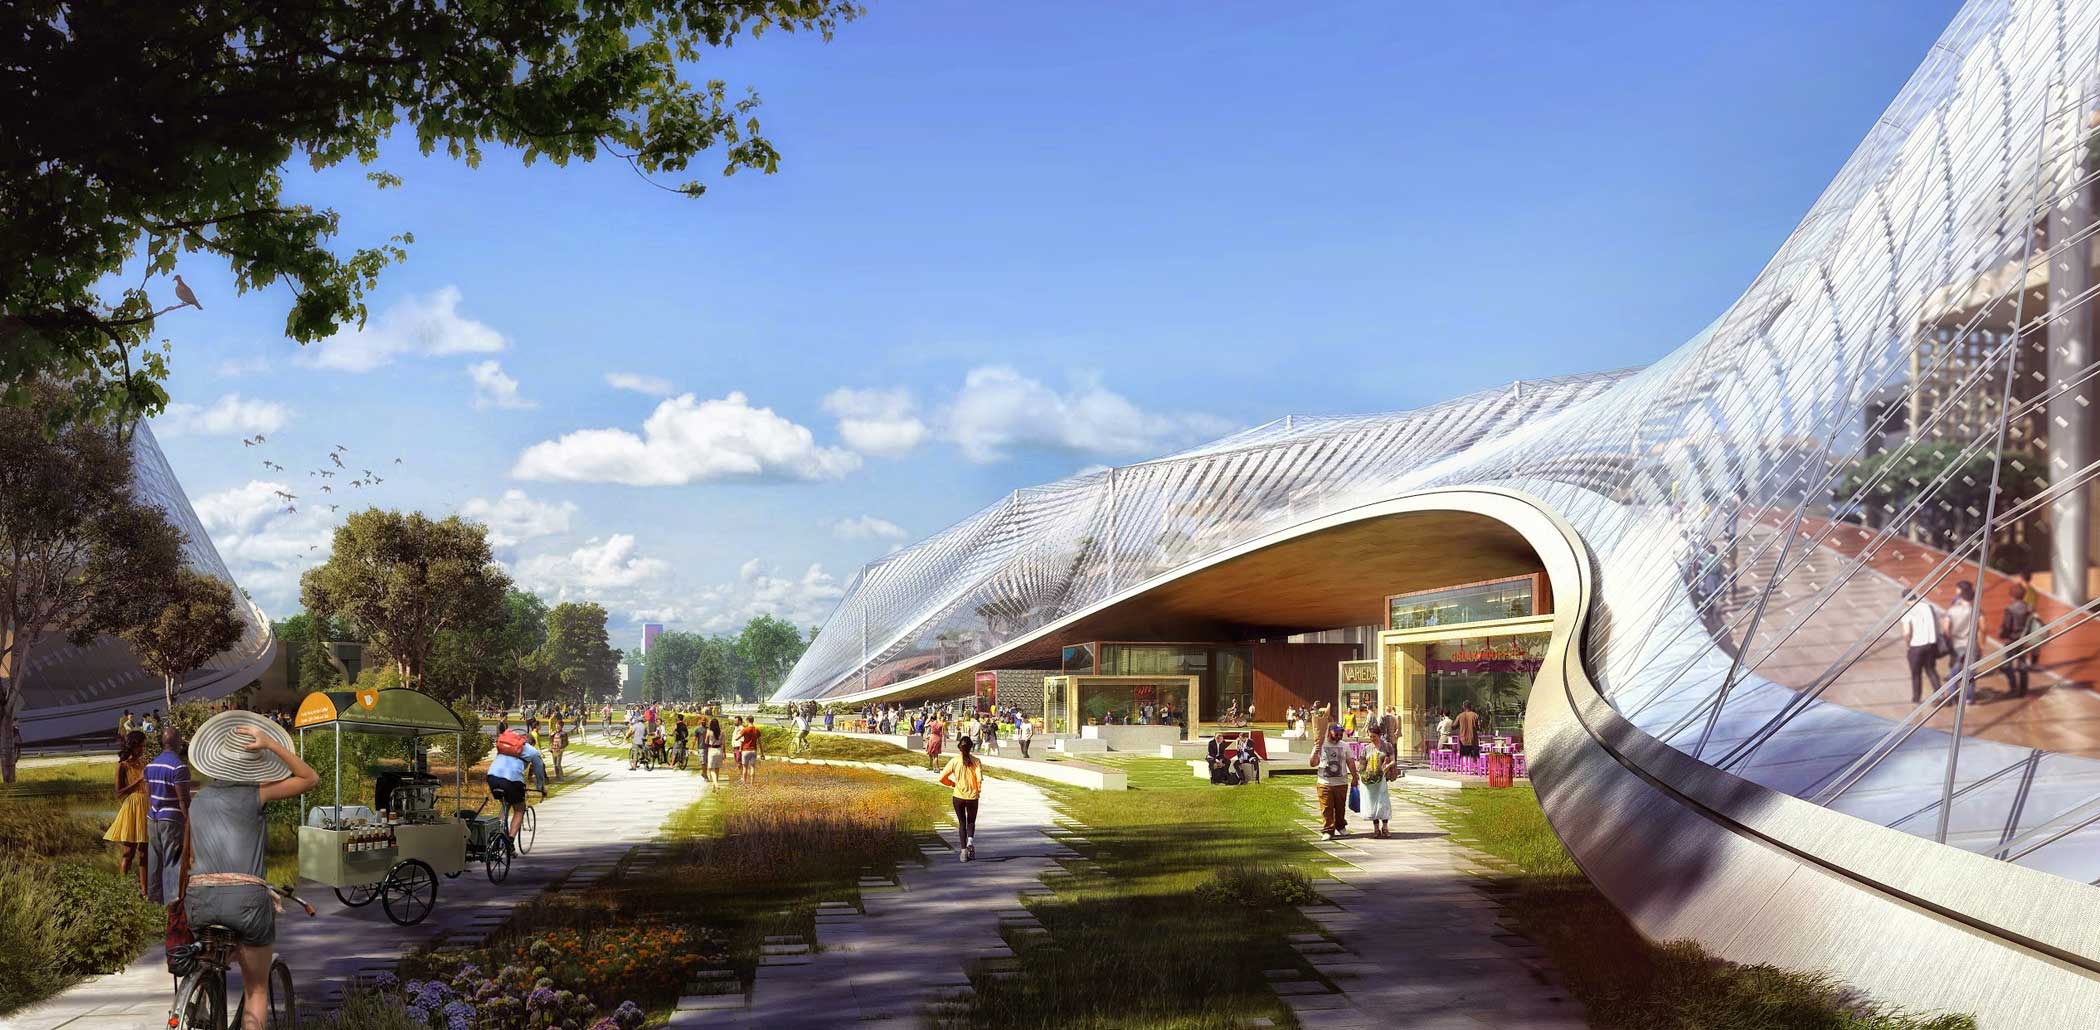 The building’s translucent canopy lifts up to allow the public Green Loop to go through the center of the building, with cafes and local shops on the lower levels.